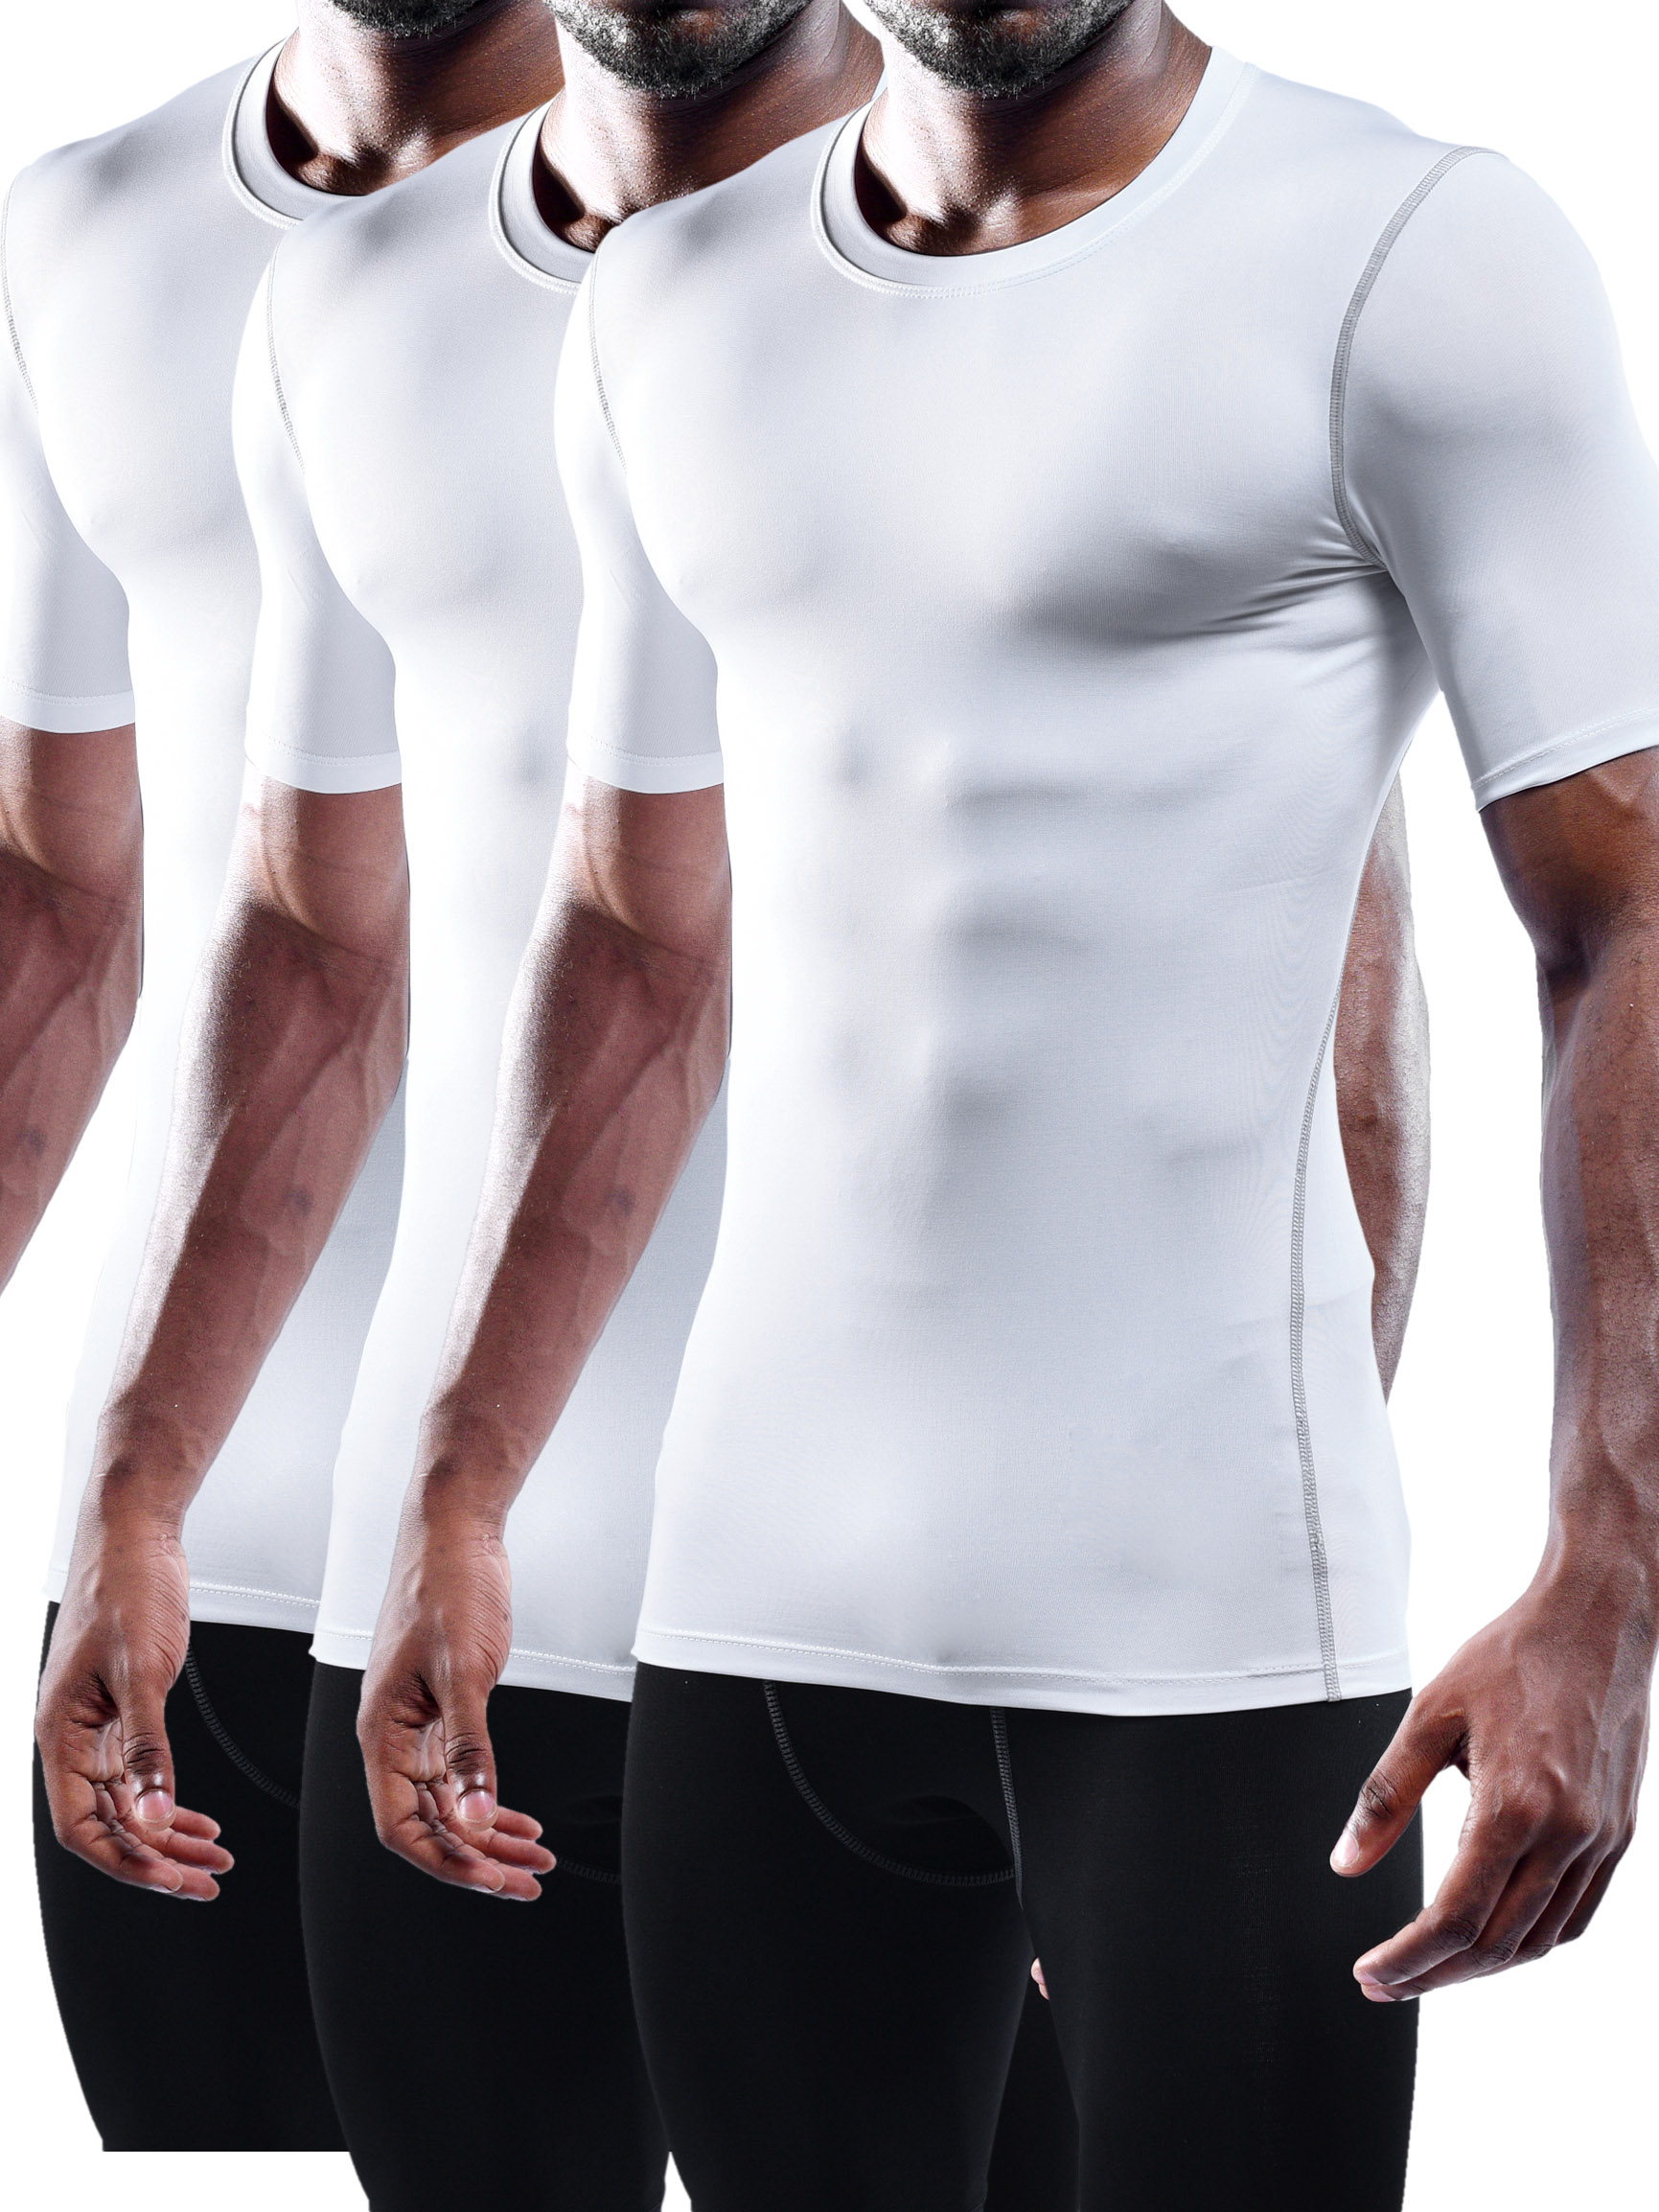 Mens Sports Compression Wear Under Pro Base Layer Short Sleeve T-Shirts